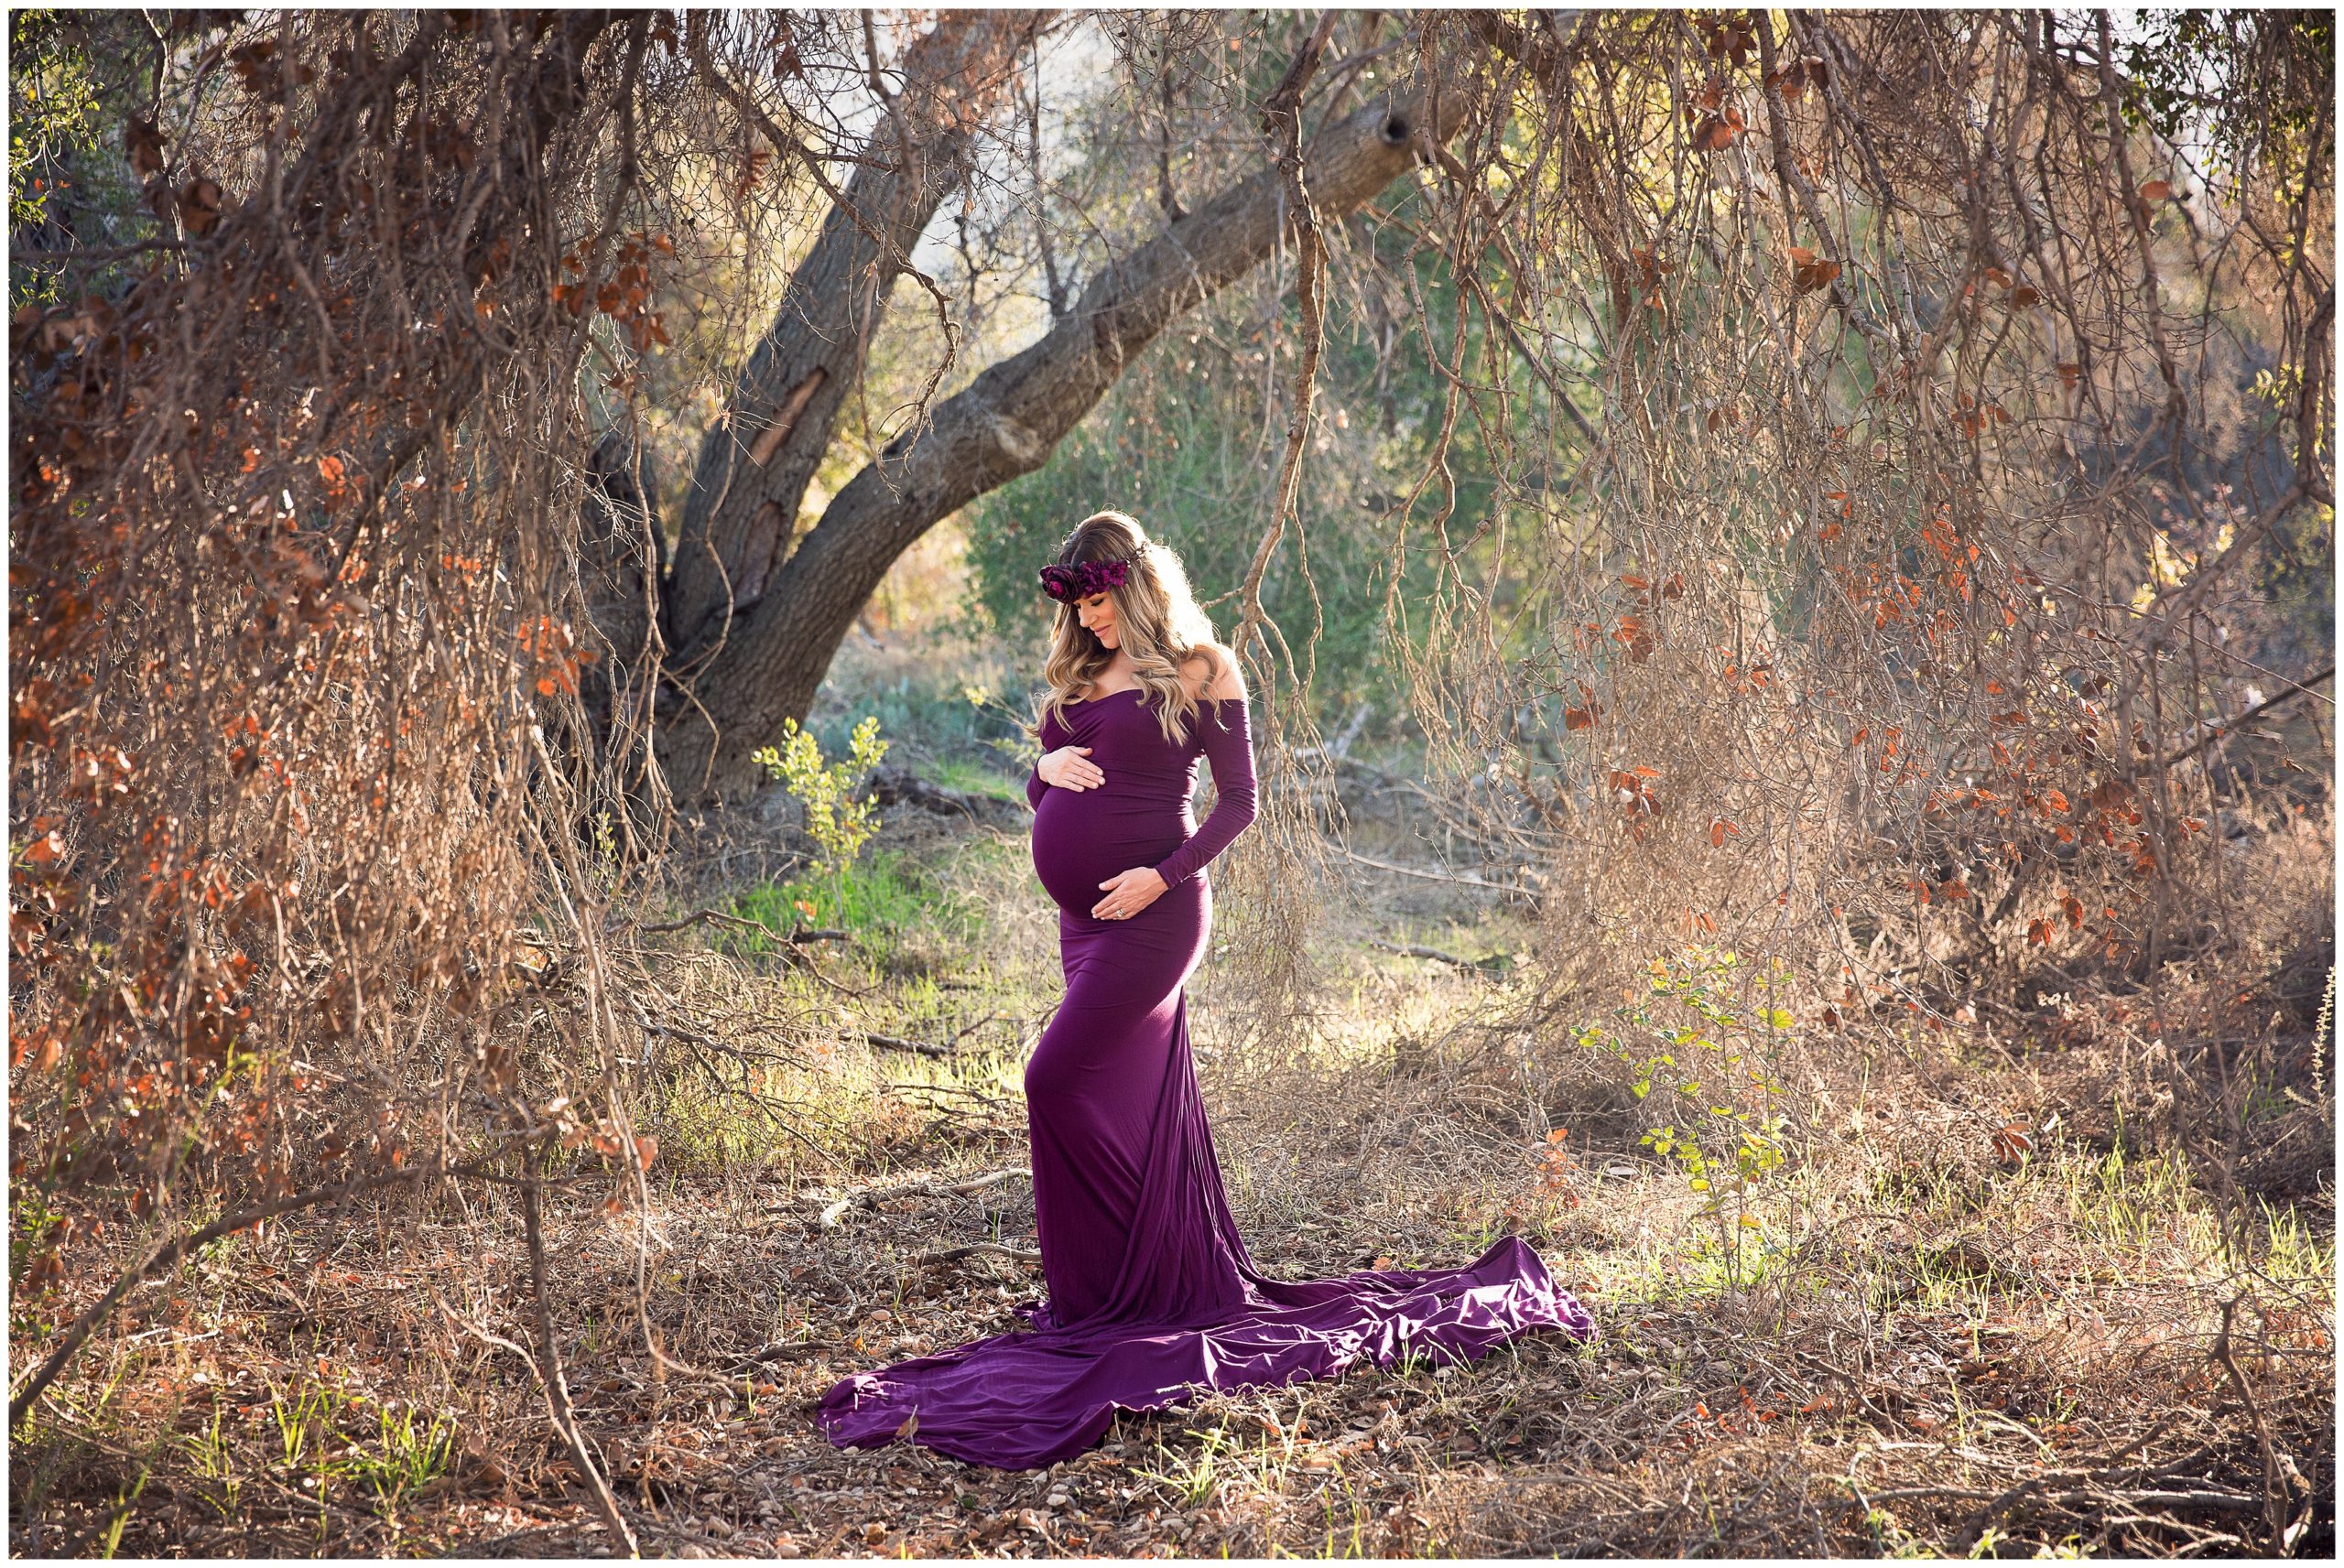 sew trendy maternity gown, plum maternity dress, Corona maternity photography, maternity photographer corona ca, maternity photographer Riverside ca, Southern California premiere maternity photographer, baby bump photography, family photography corona ca, spring maternity photography, outdoor maternity photography